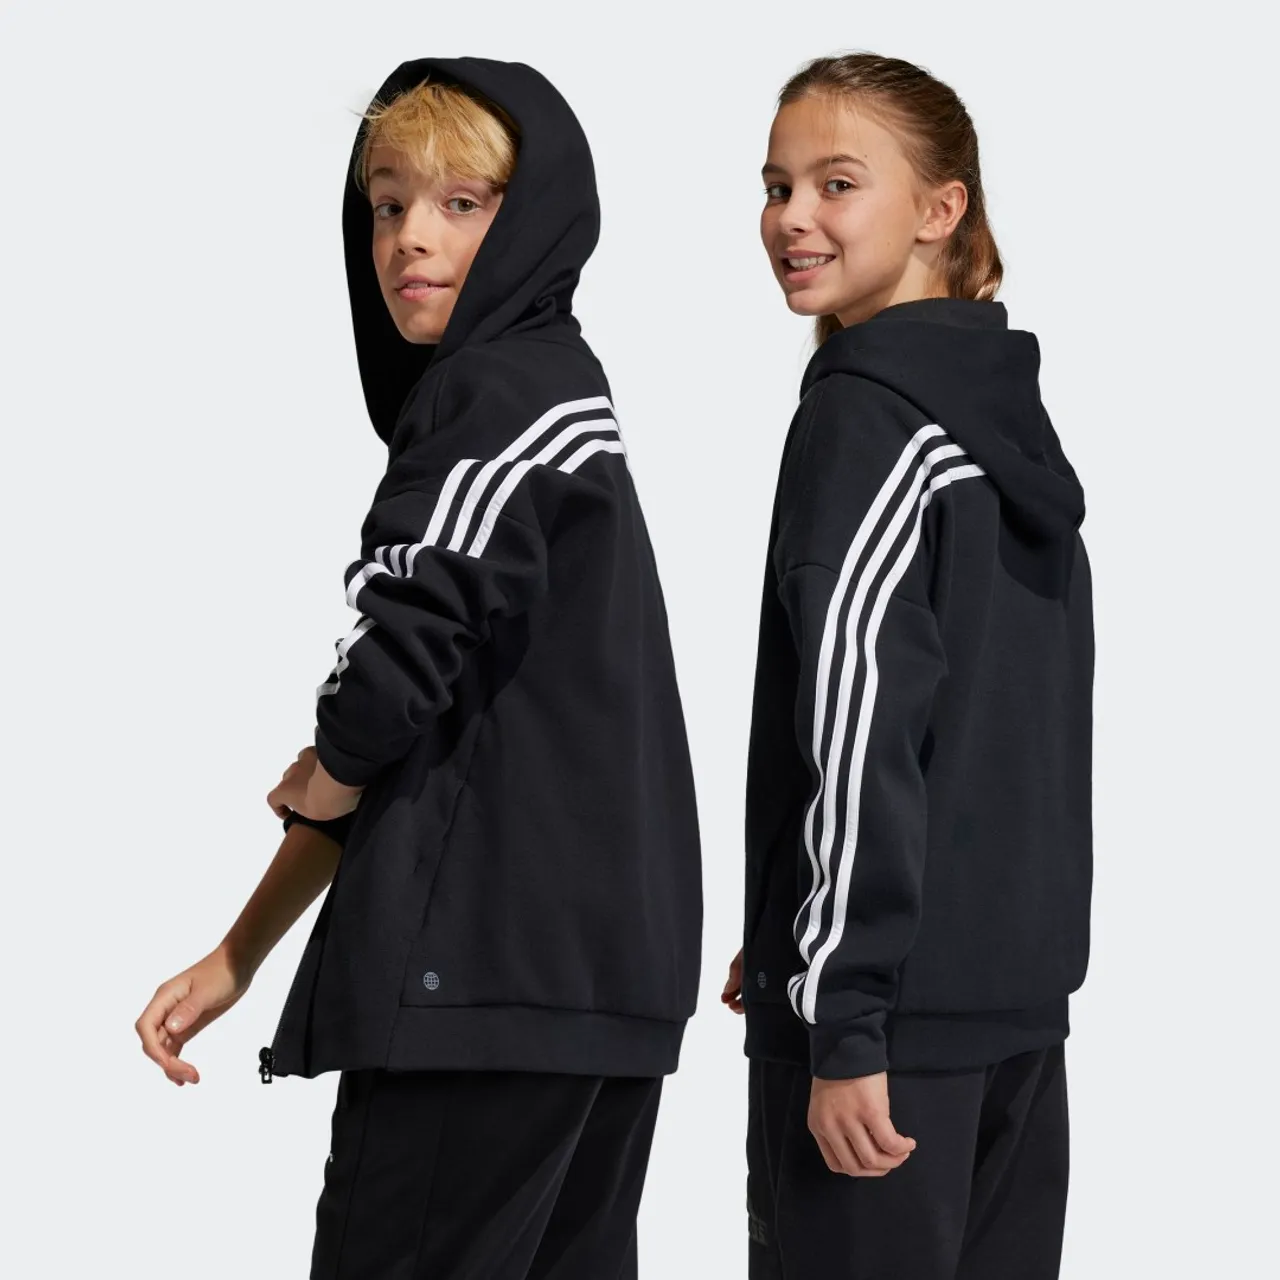 Future Icons 3-Stripes Full-Zip Hooded Track Top